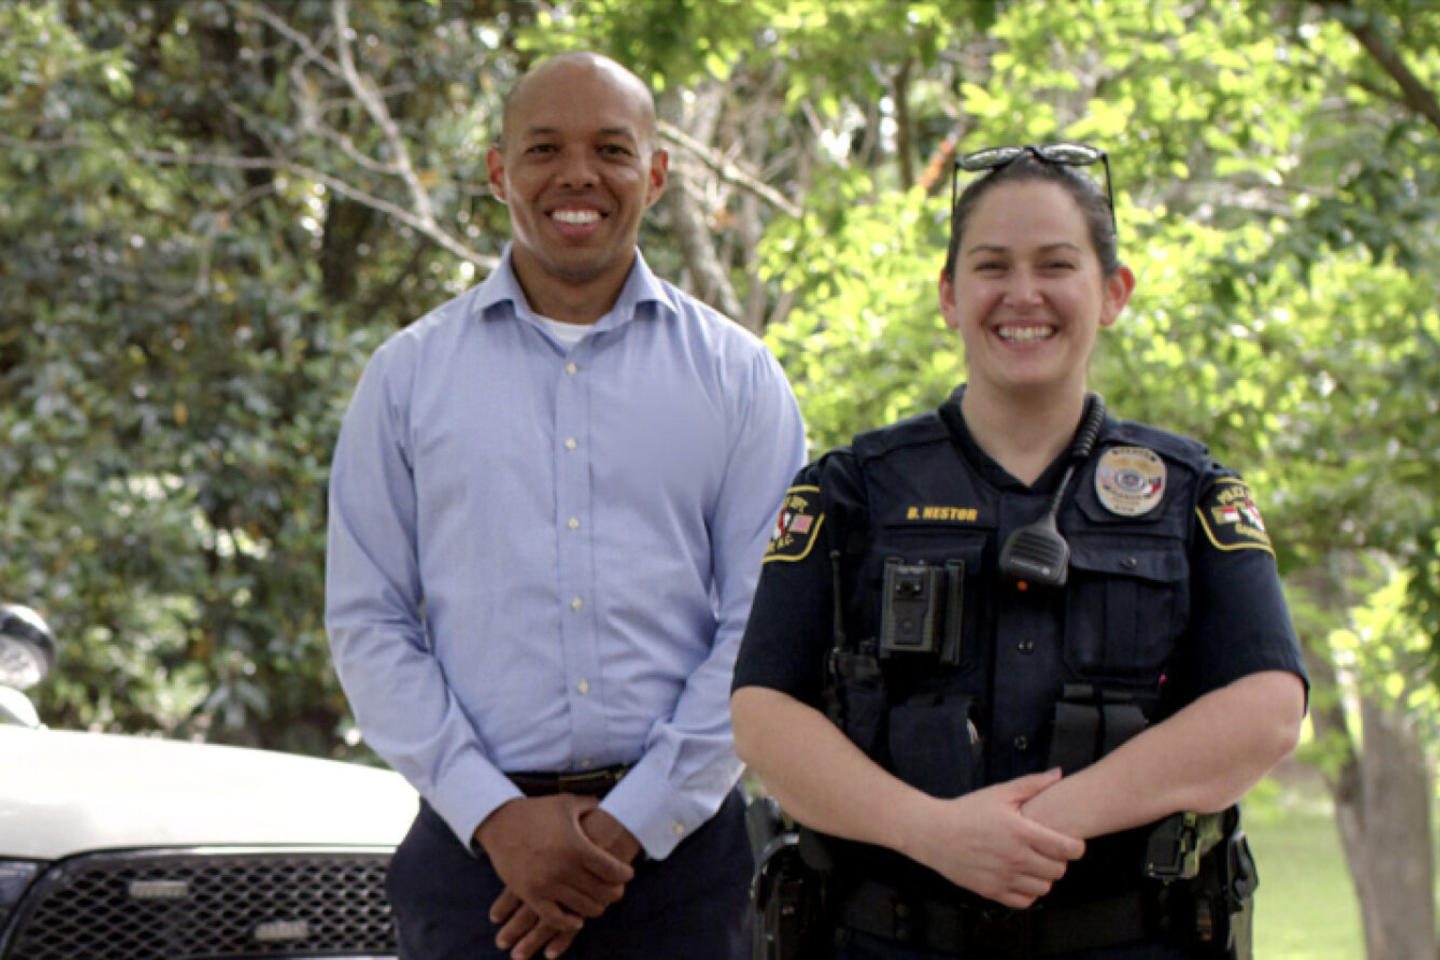 Officer and African American man smiling